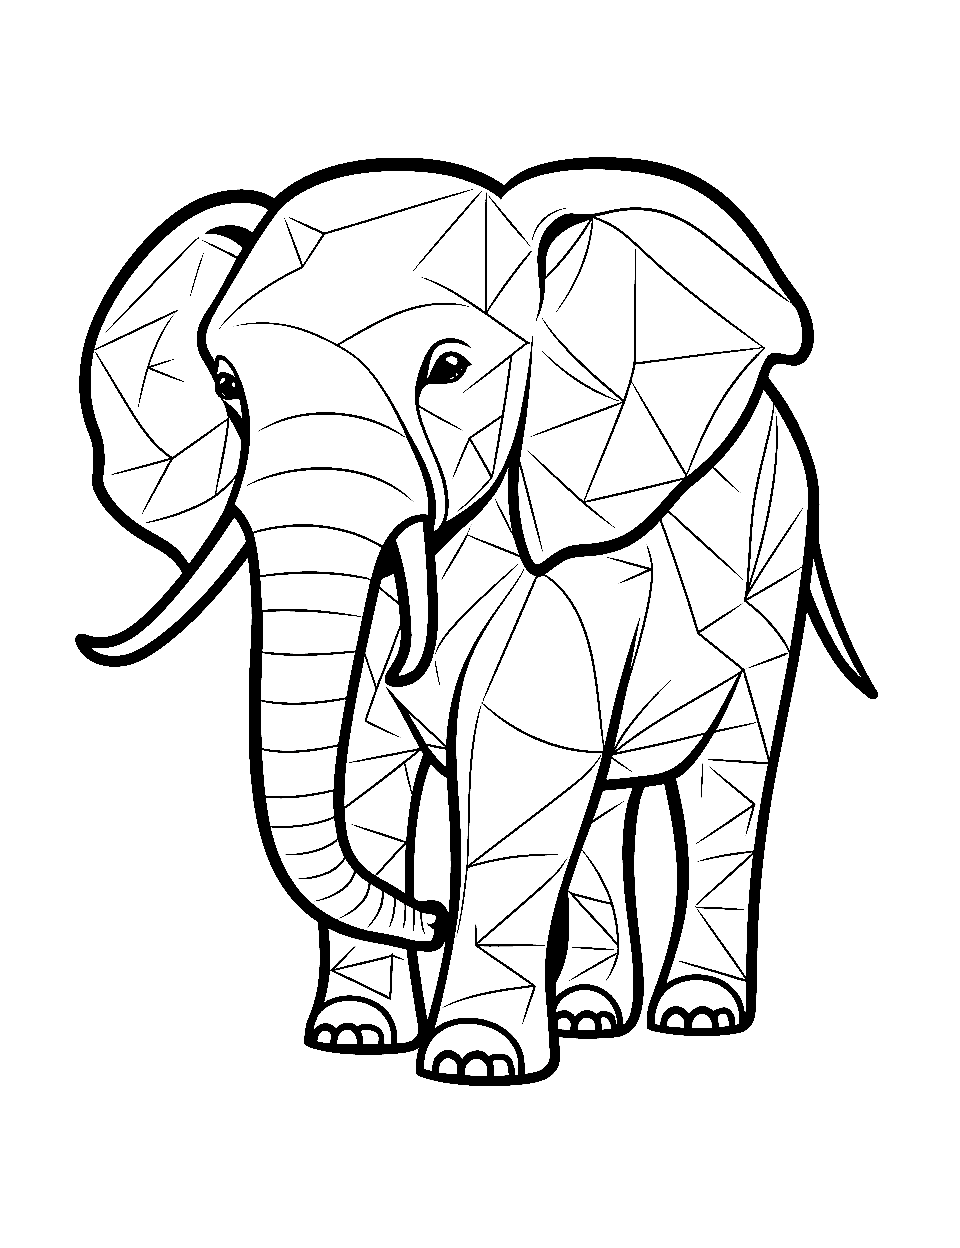 Geometric Elephant Design Coloring Page - An elephant constructed of geometric shapes and patterns.